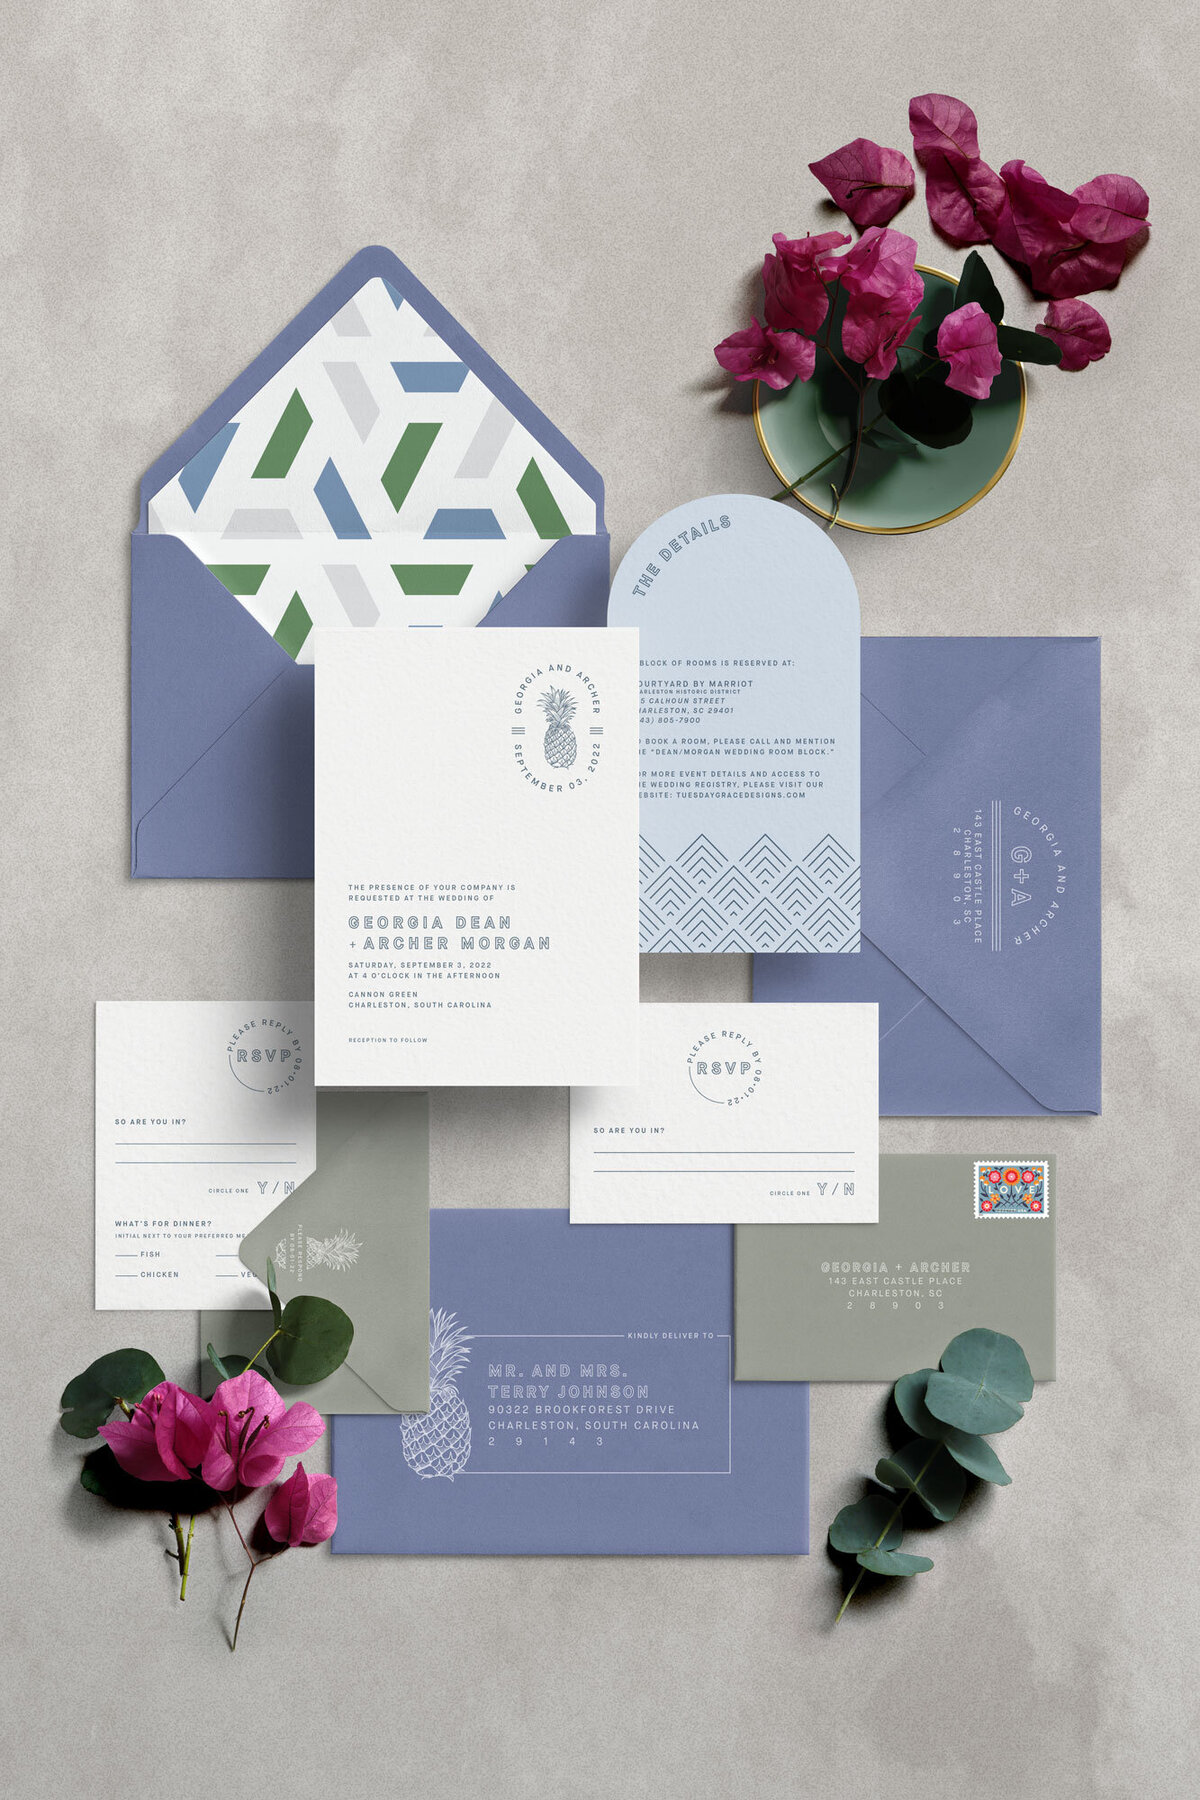 Jupiter Florida wedding invitations for wedding at Blowing Rocks. Invitations with holographic foil.